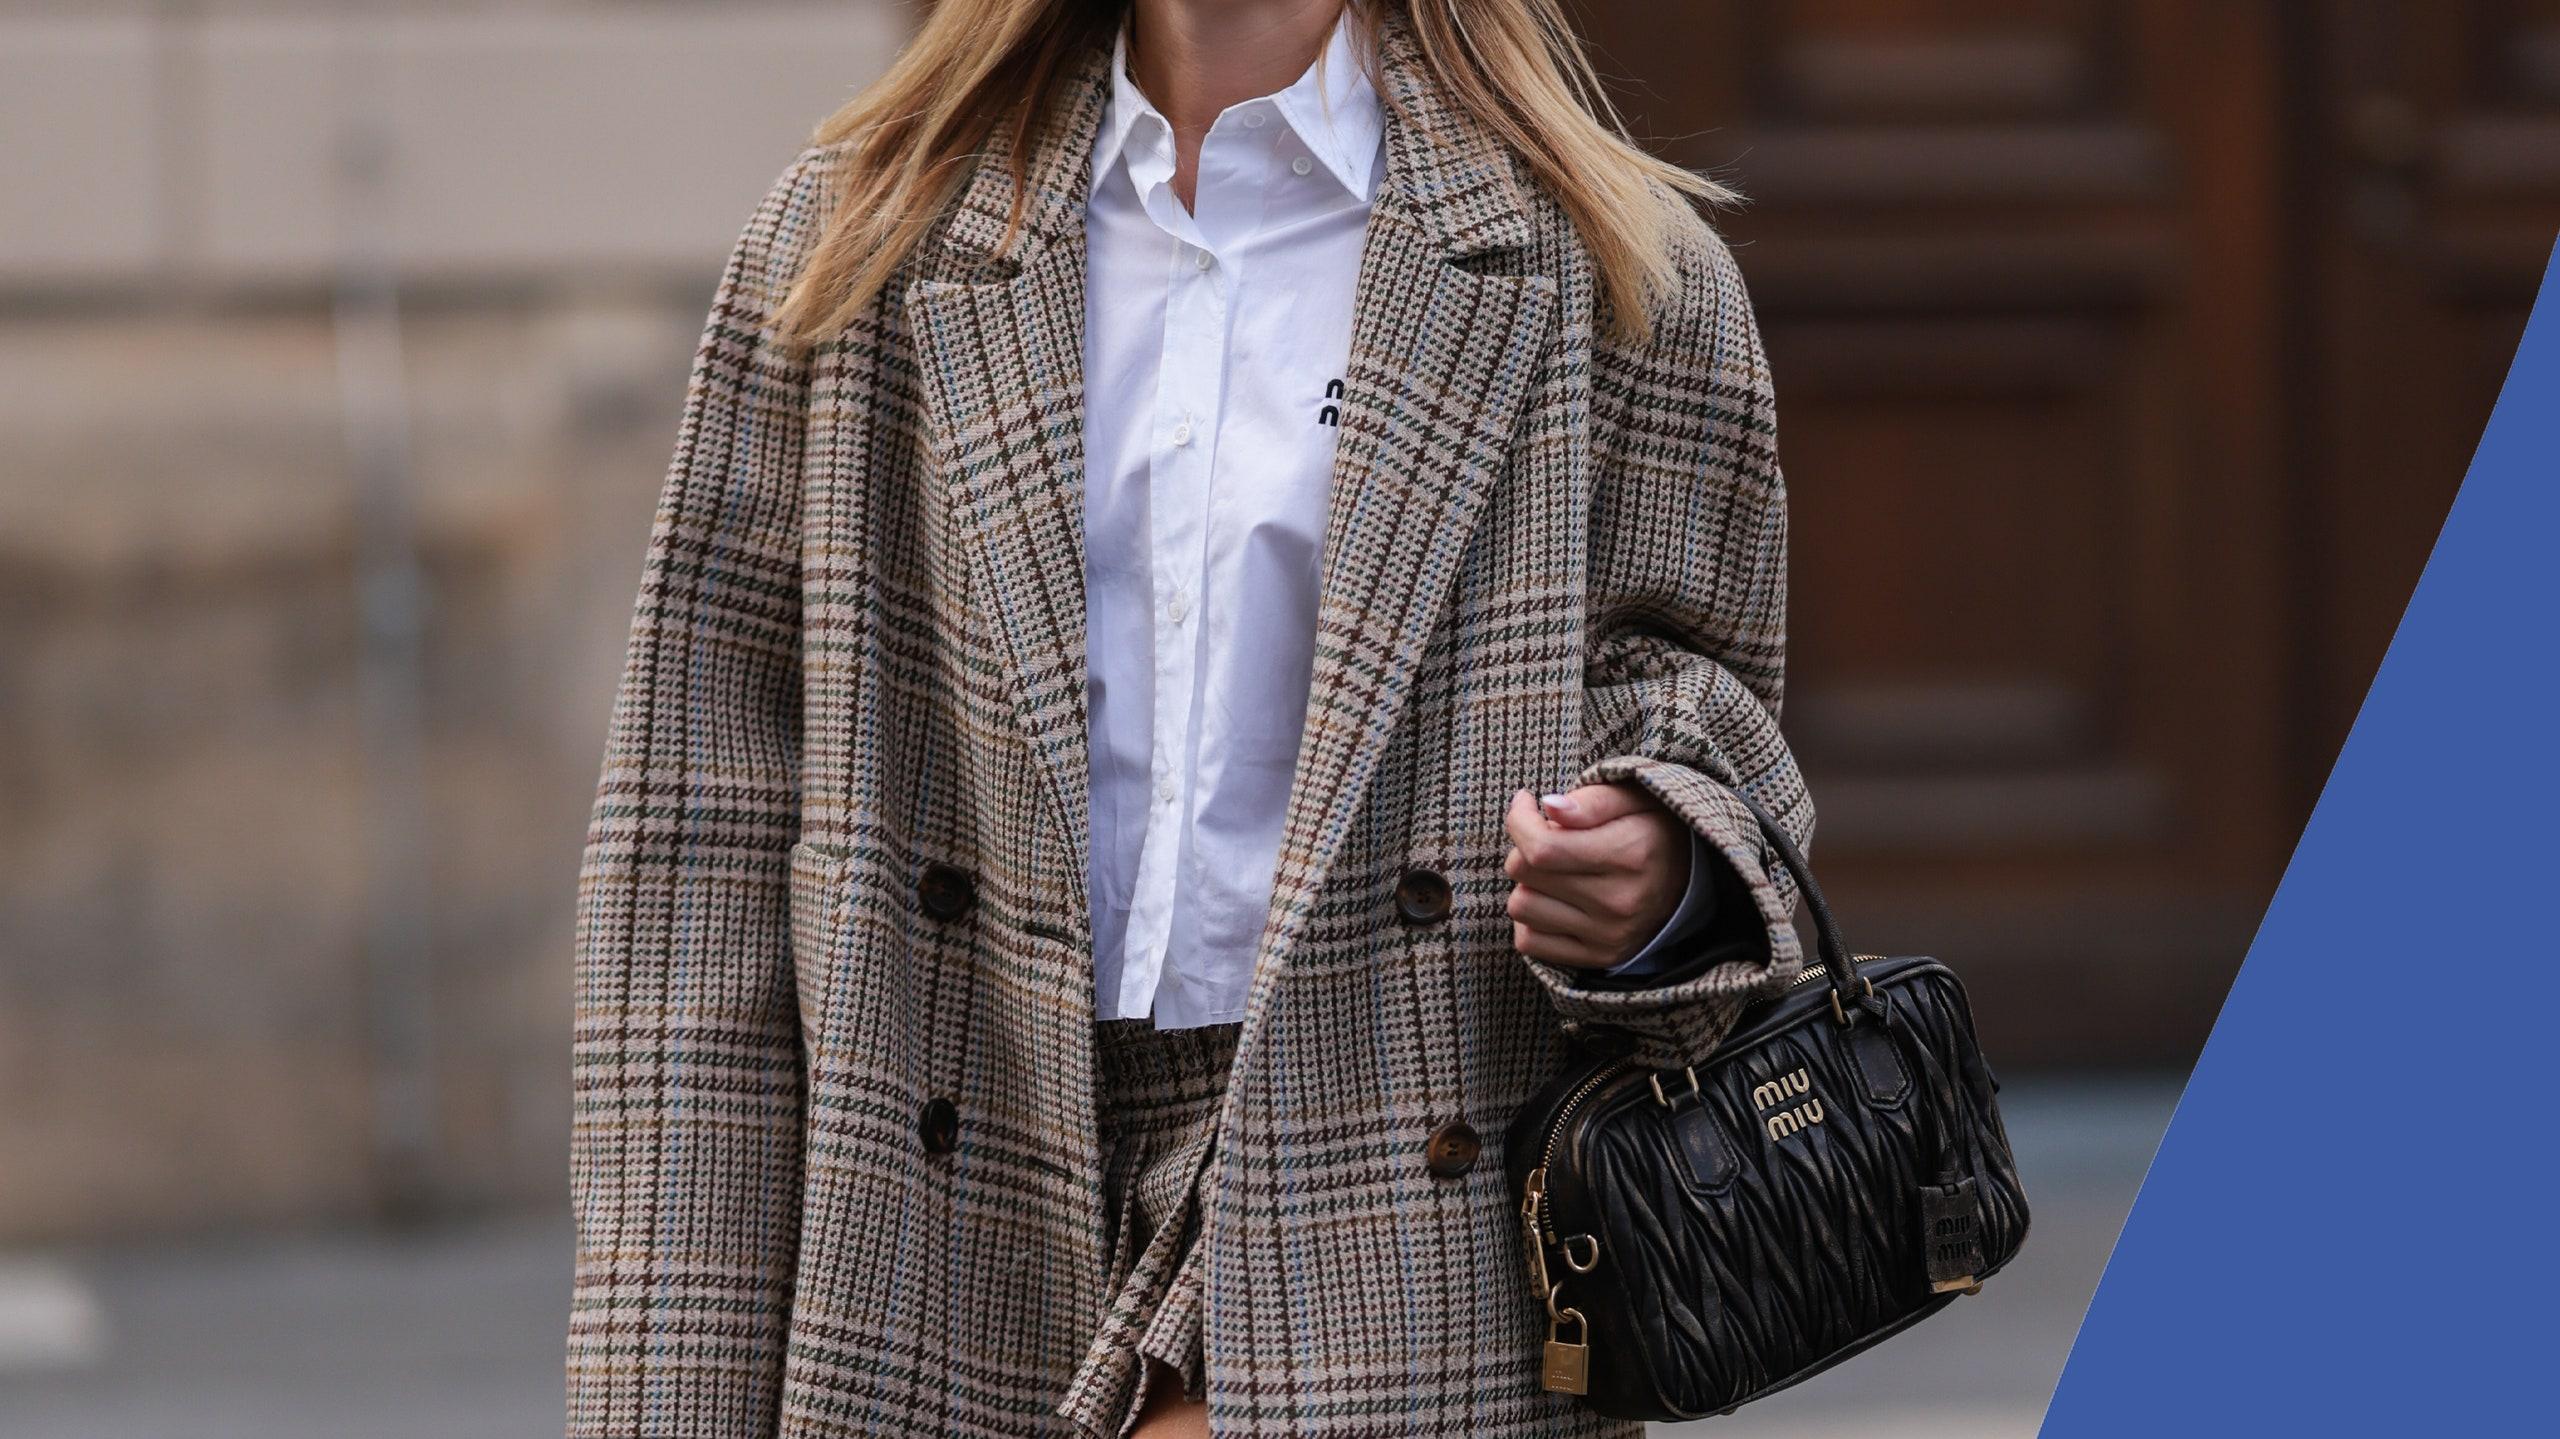 Preppycore Aesthetic How To Get The Look Glamour Uk